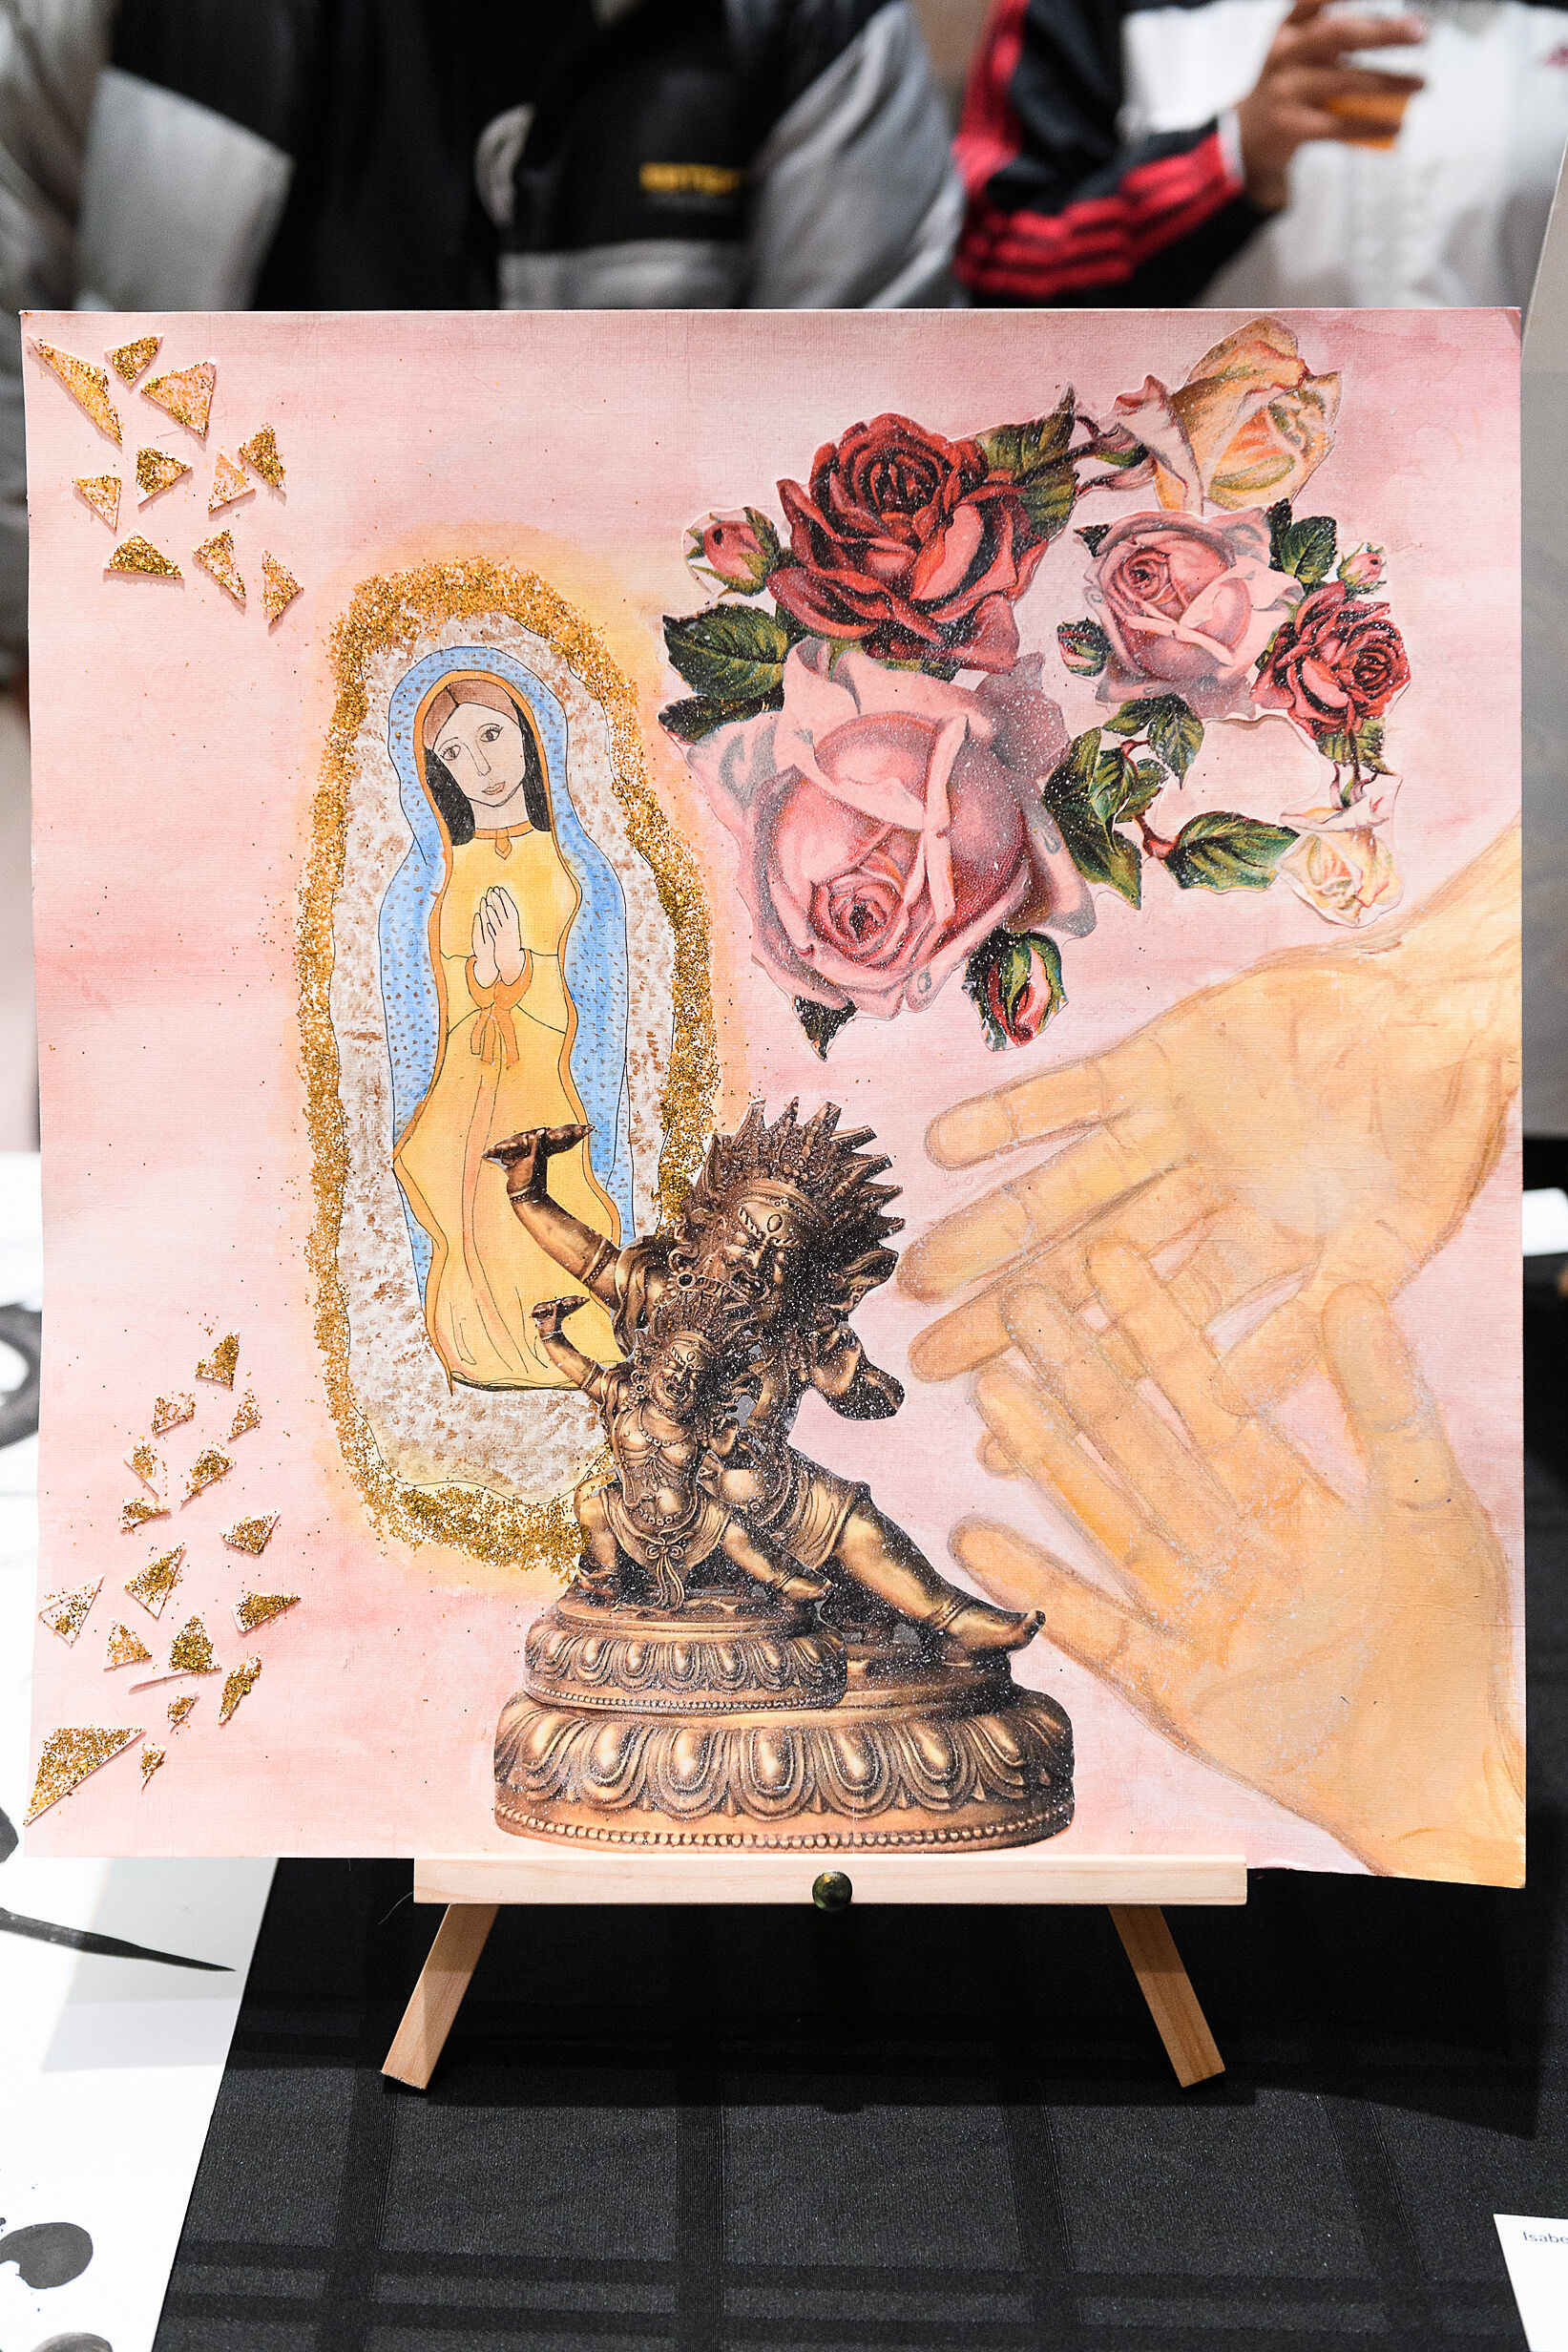 Hands, flowers, virgin mary and gold sparkles on a painting.